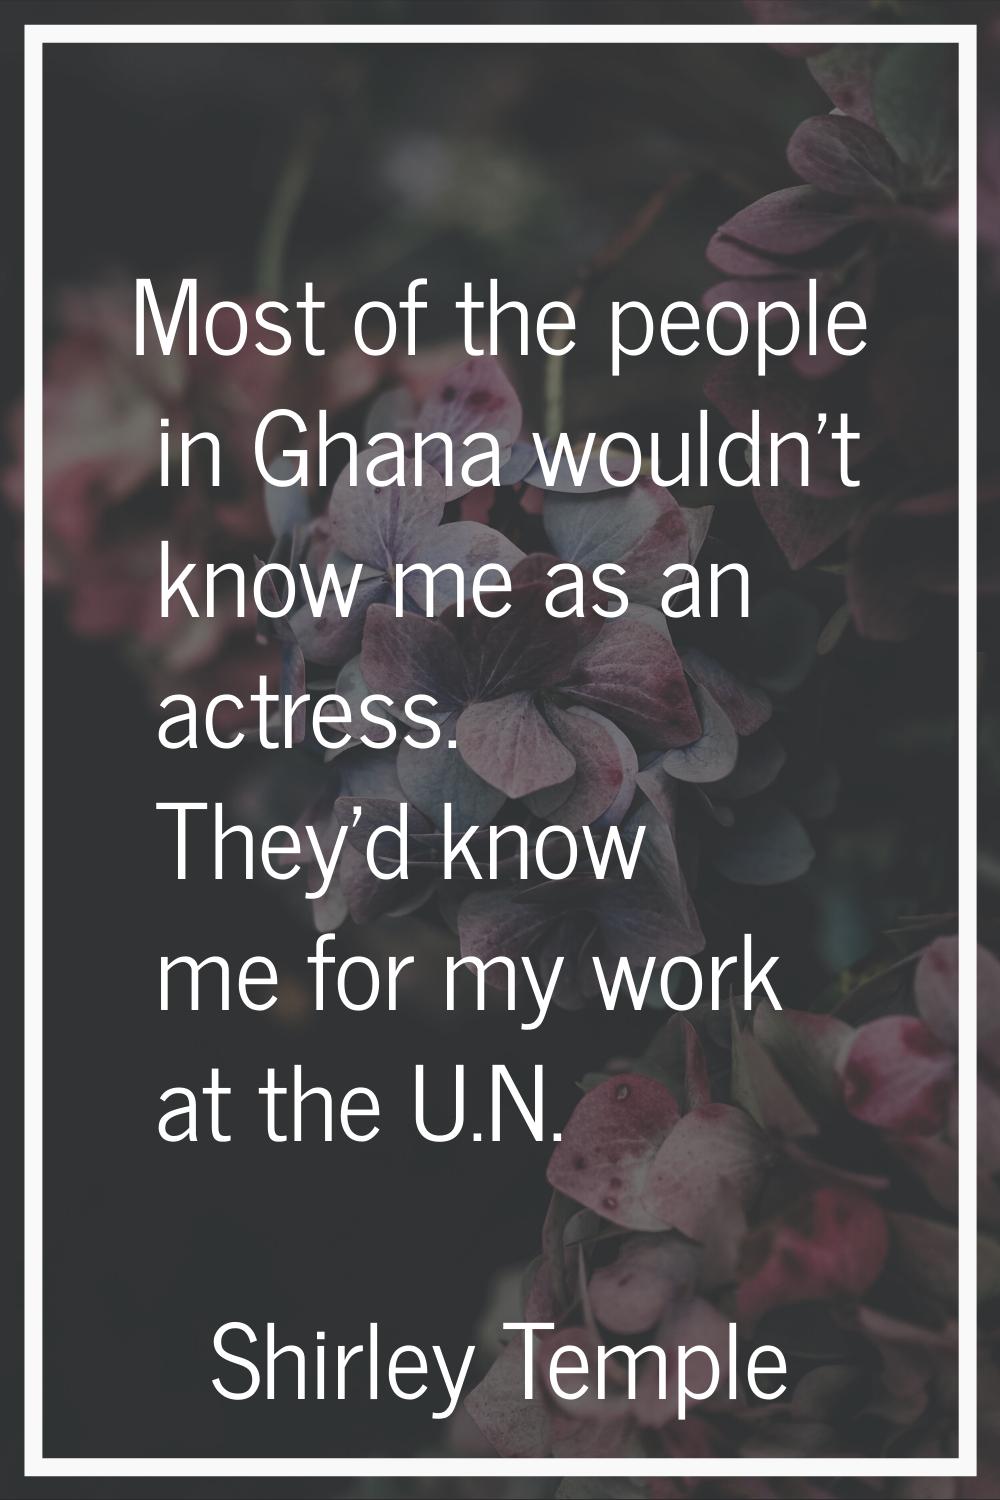 Most of the people in Ghana wouldn't know me as an actress. They'd know me for my work at the U.N.